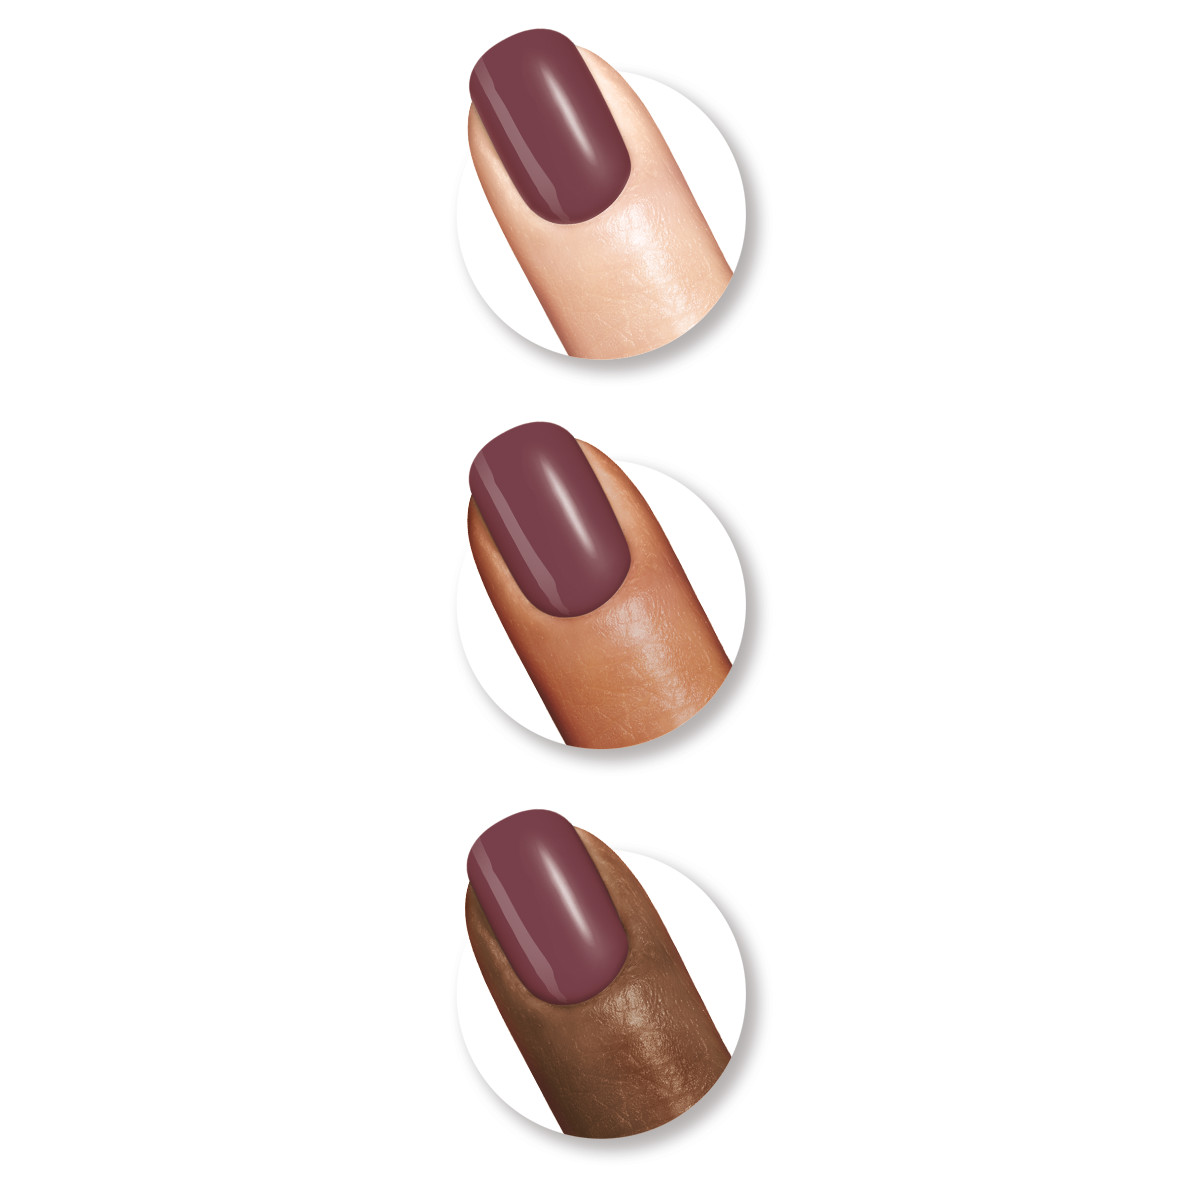 Sally Hansen Complete Salon Manicure Nail Color, Plums the Word - image 3 of 3